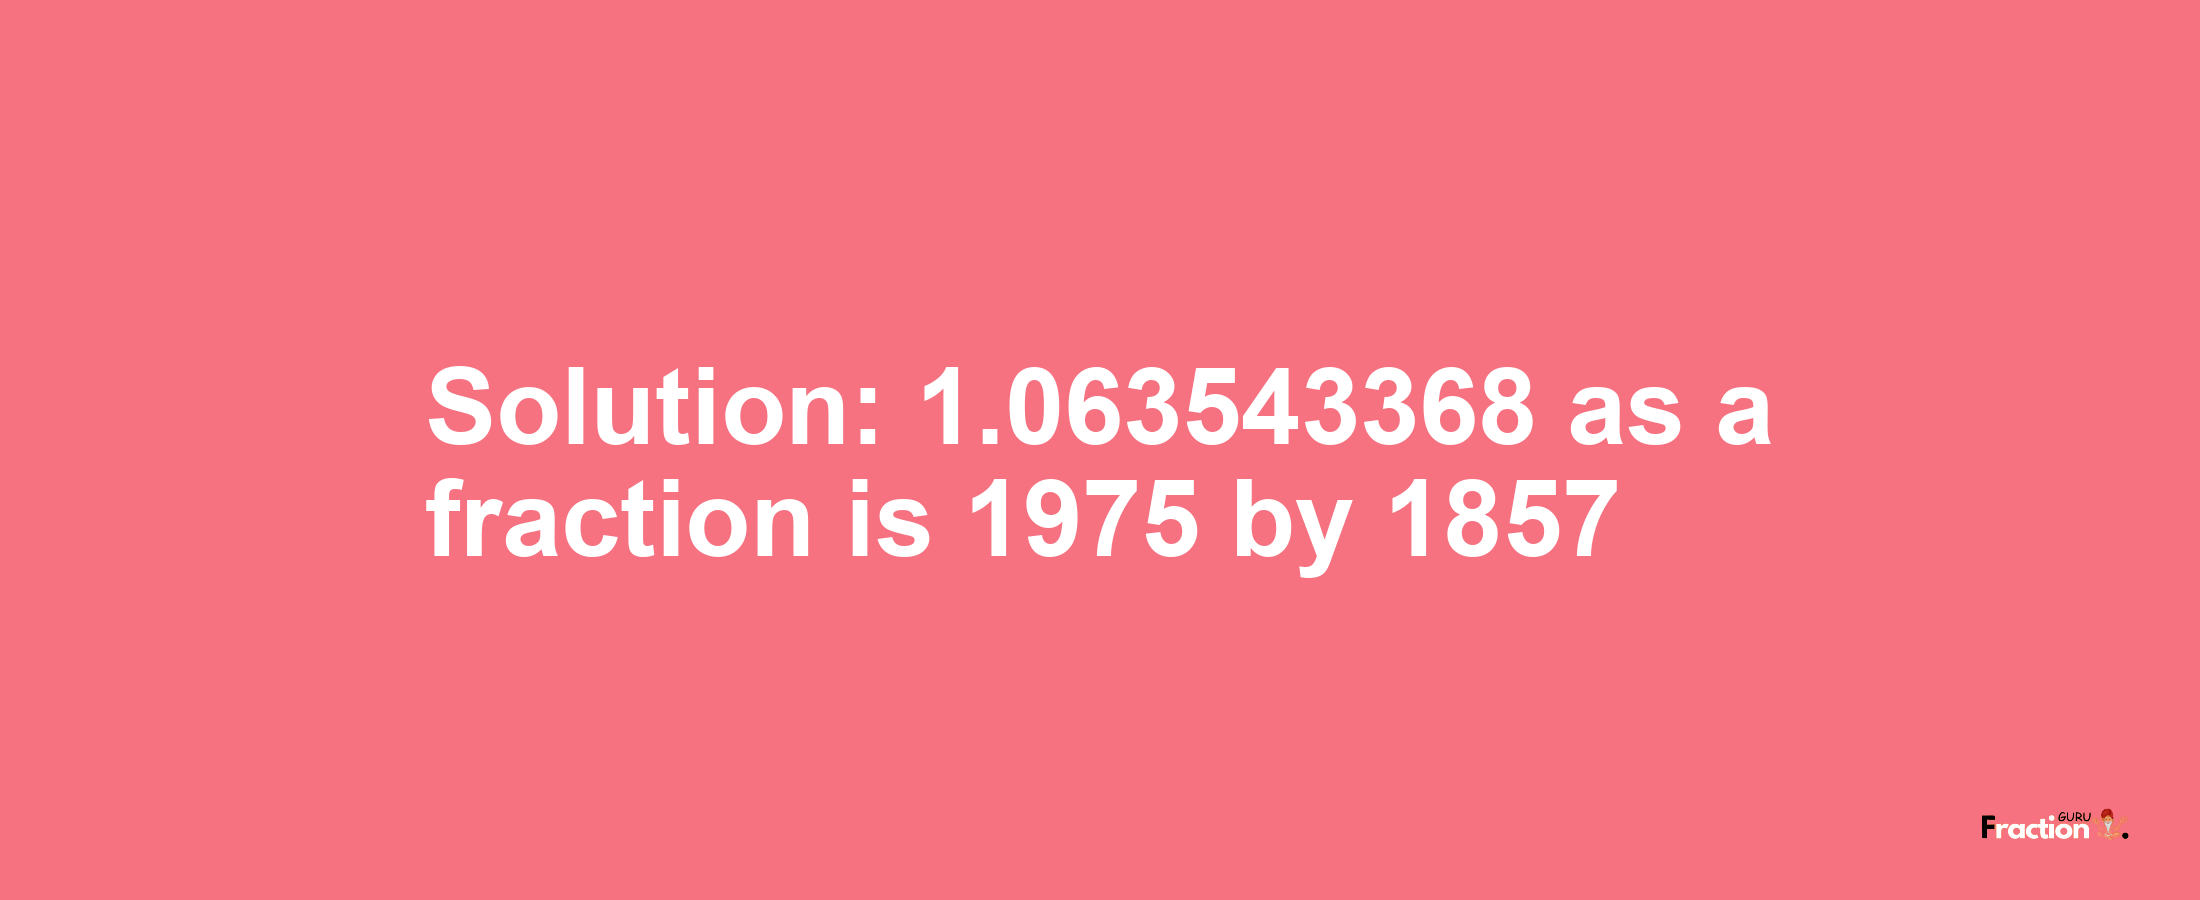 Solution:1.063543368 as a fraction is 1975/1857